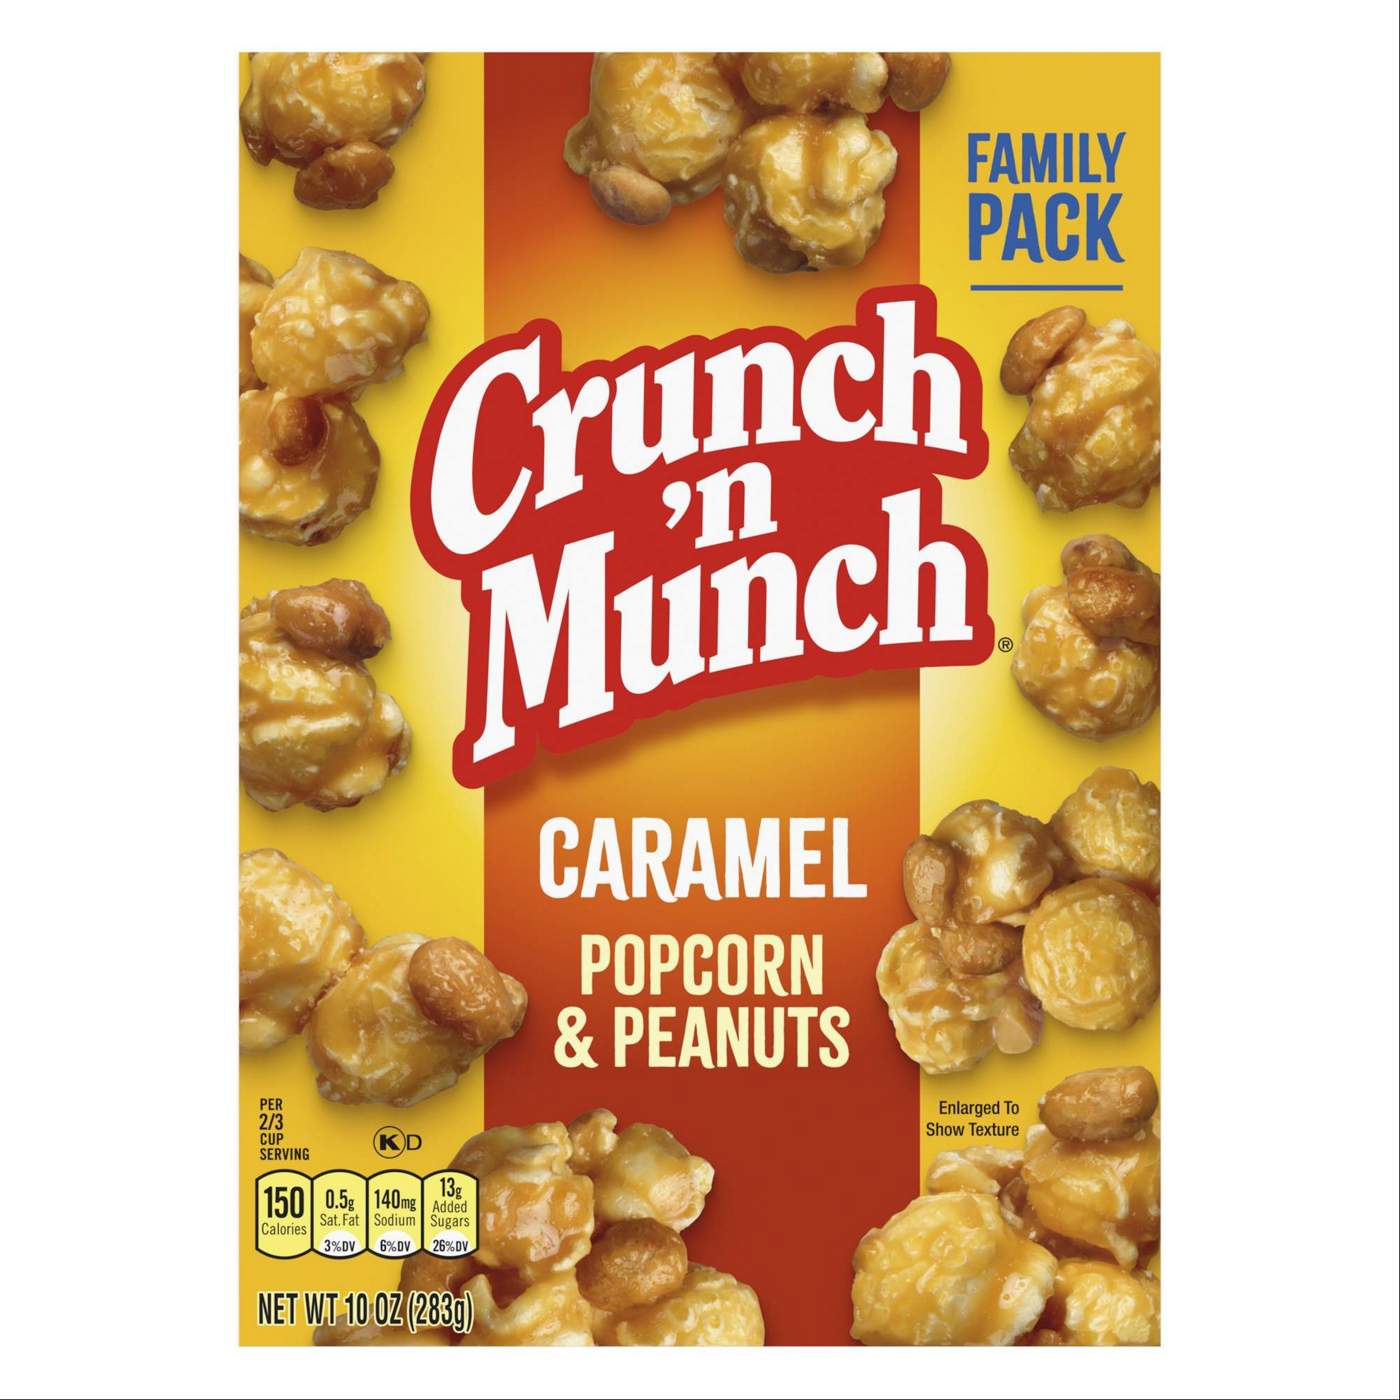 Crunch 'n Munch Caramel Popcorn with Peanuts; image 2 of 5